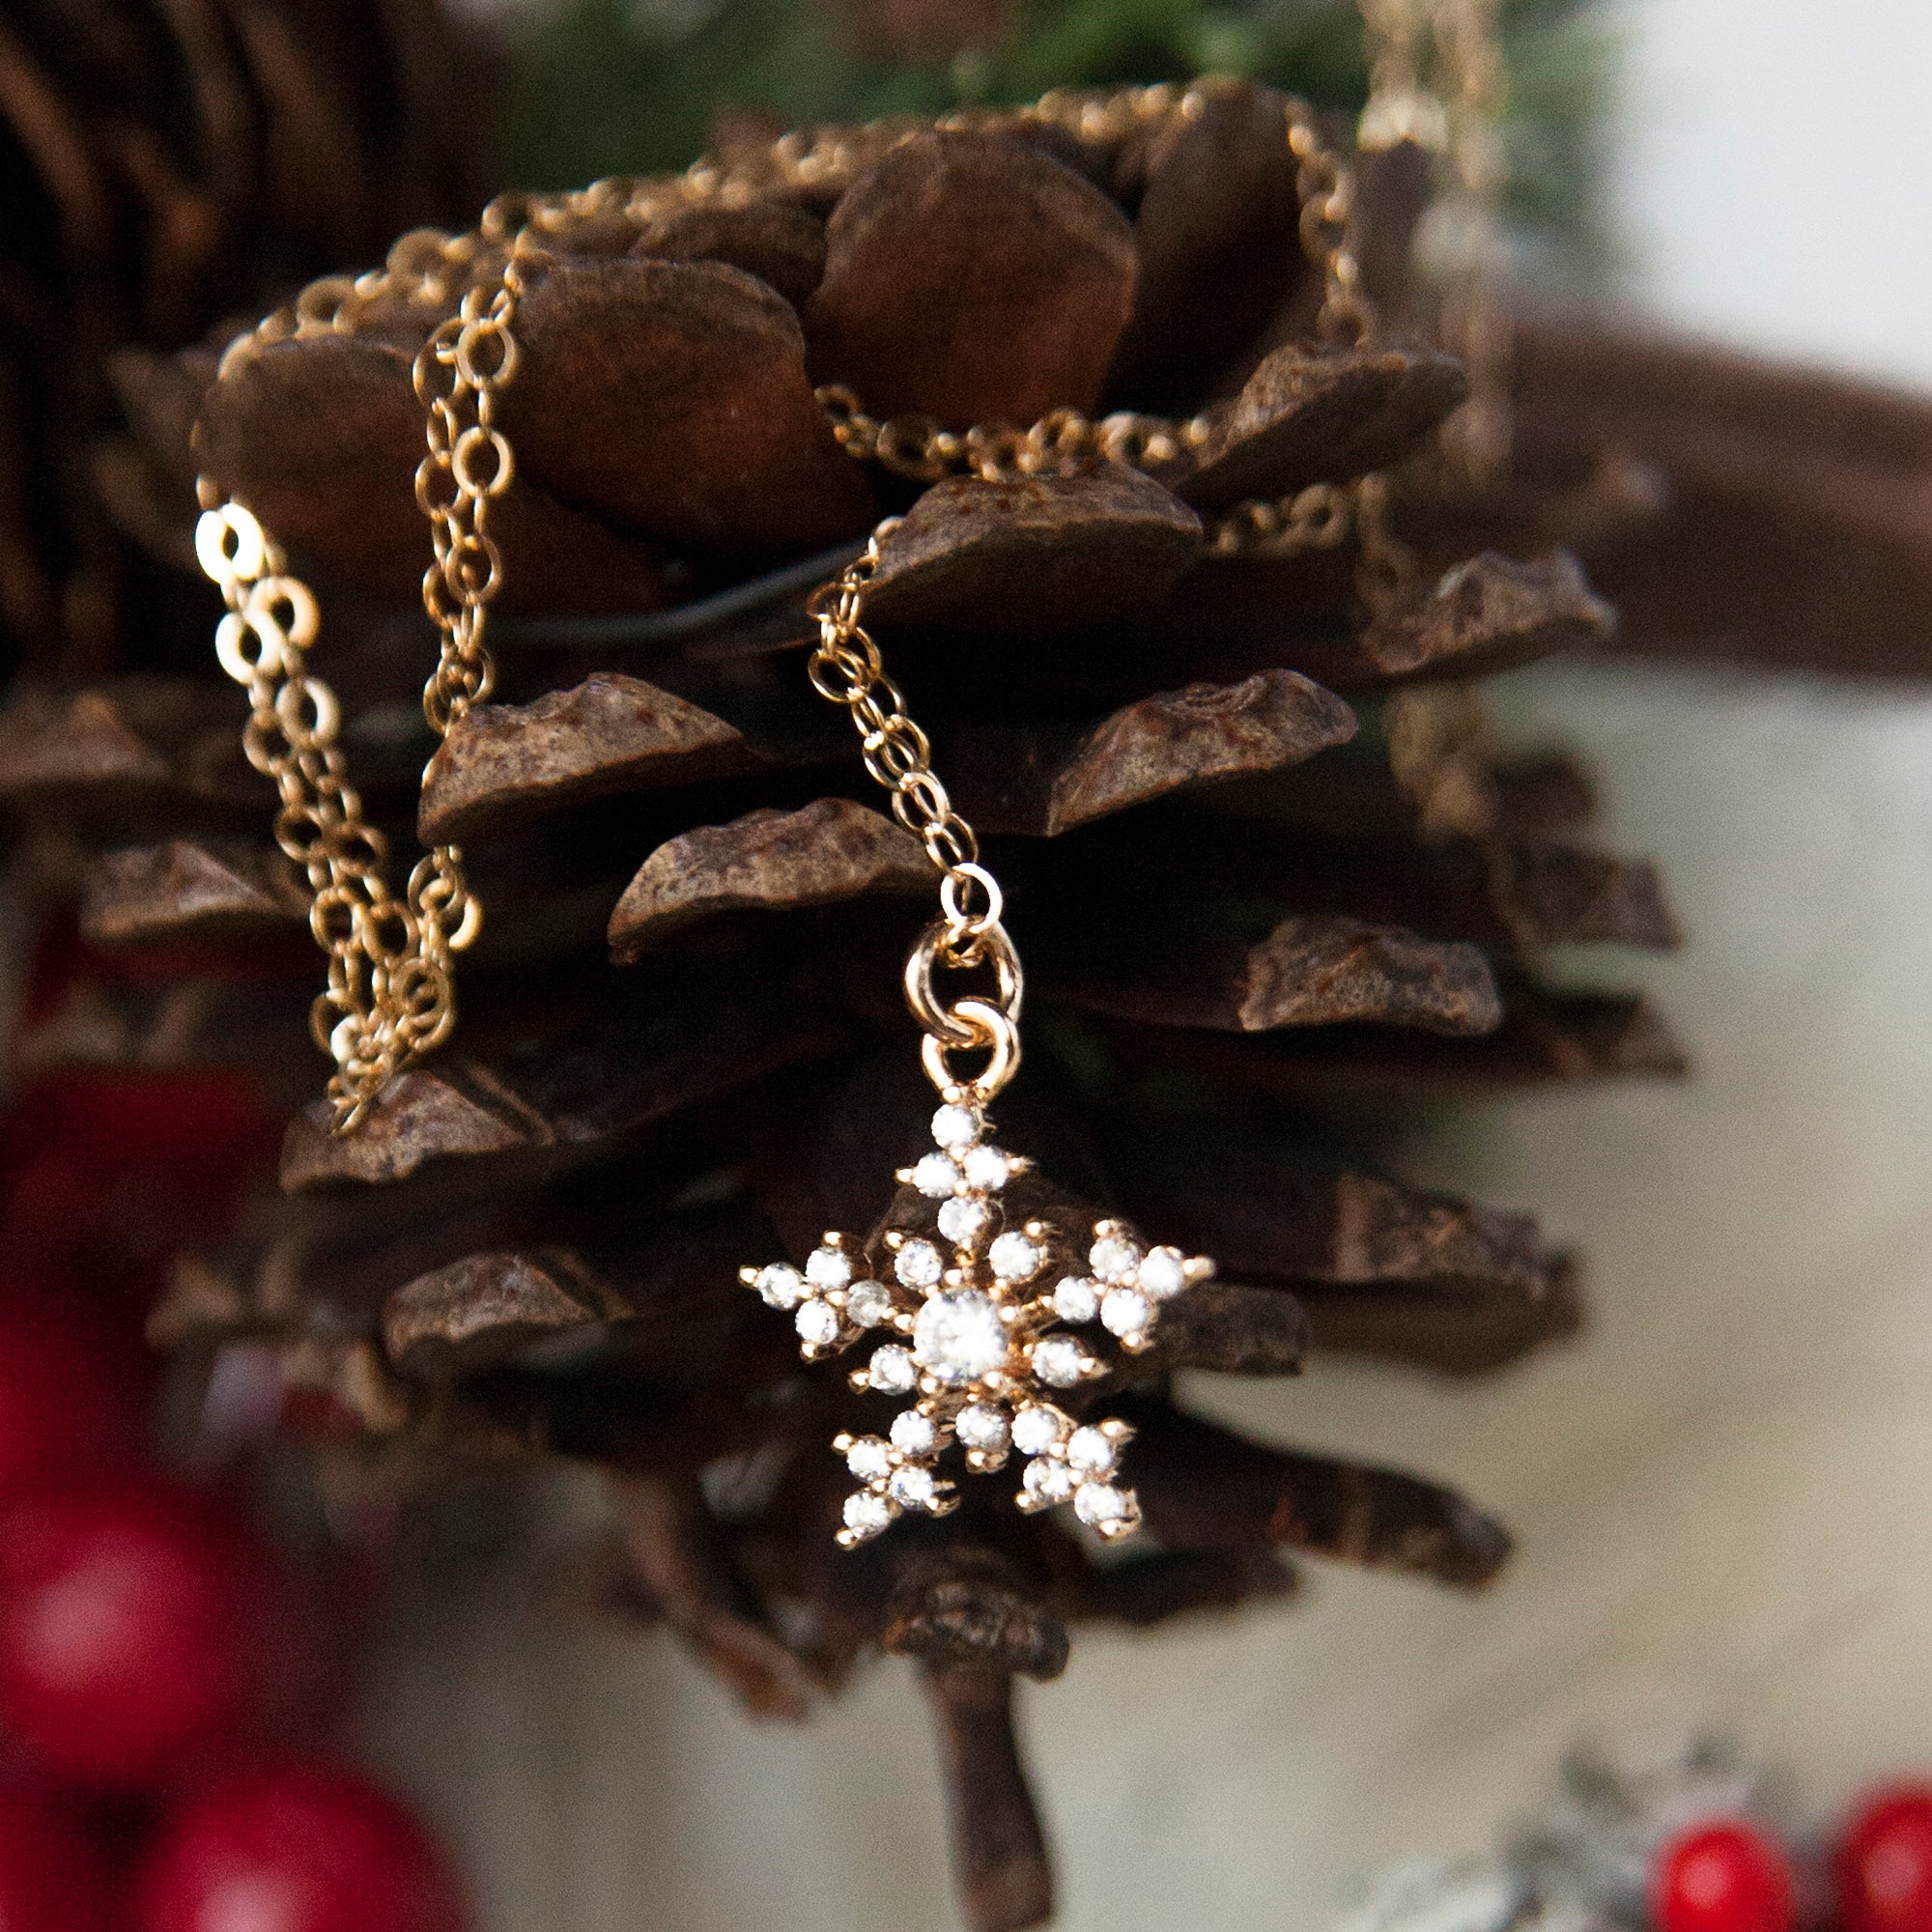 Buy Snowflake Necklace, Sterling Silver Snowflake Pendant on Sterling Silver  Necklace Chain, Bridesmaid Necklace, Christmas Gift Necklace Online in  India - Etsy